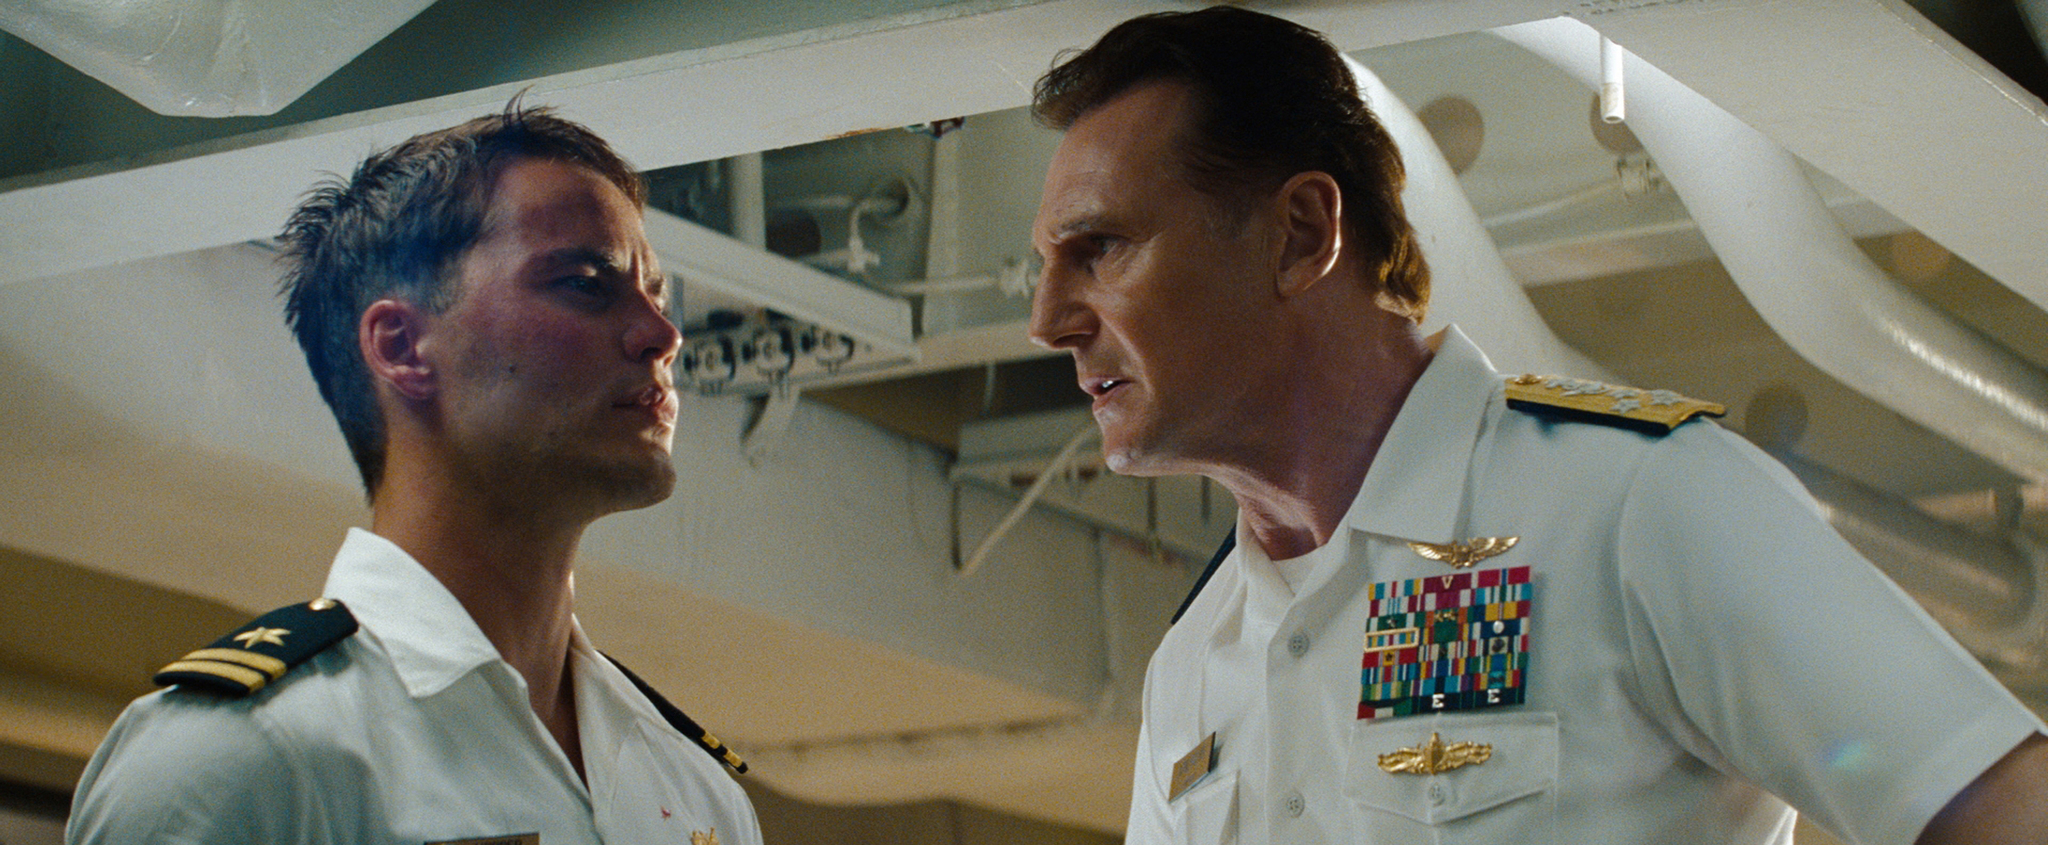 Still of Liam Neeson and Taylor Kitsch in Laivu musis (2012)